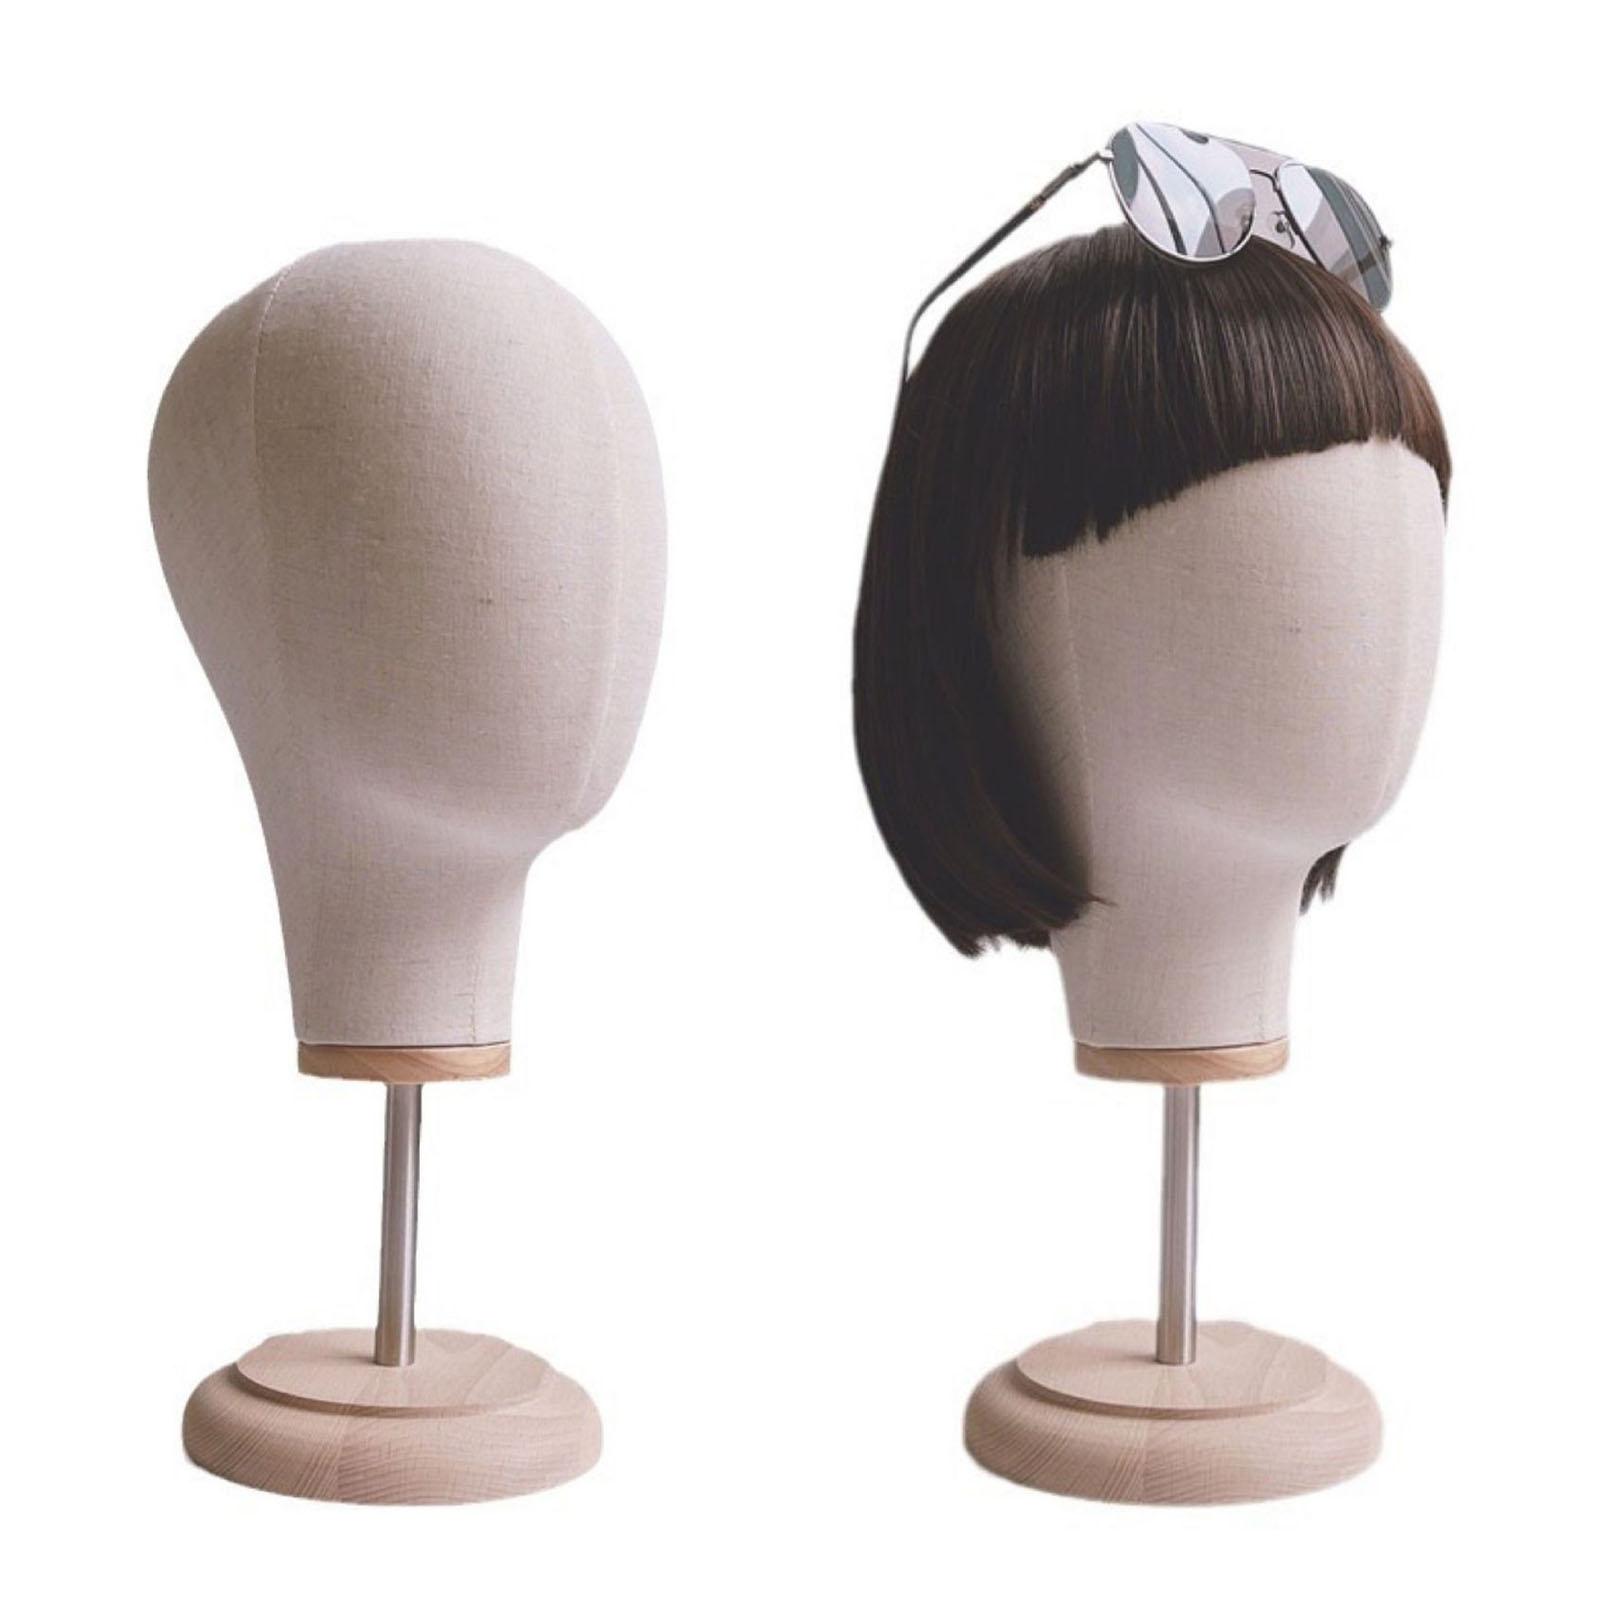 Mannequin Head Model Wig Hat Display Holder for Shopping Mall Styling Drying Beige